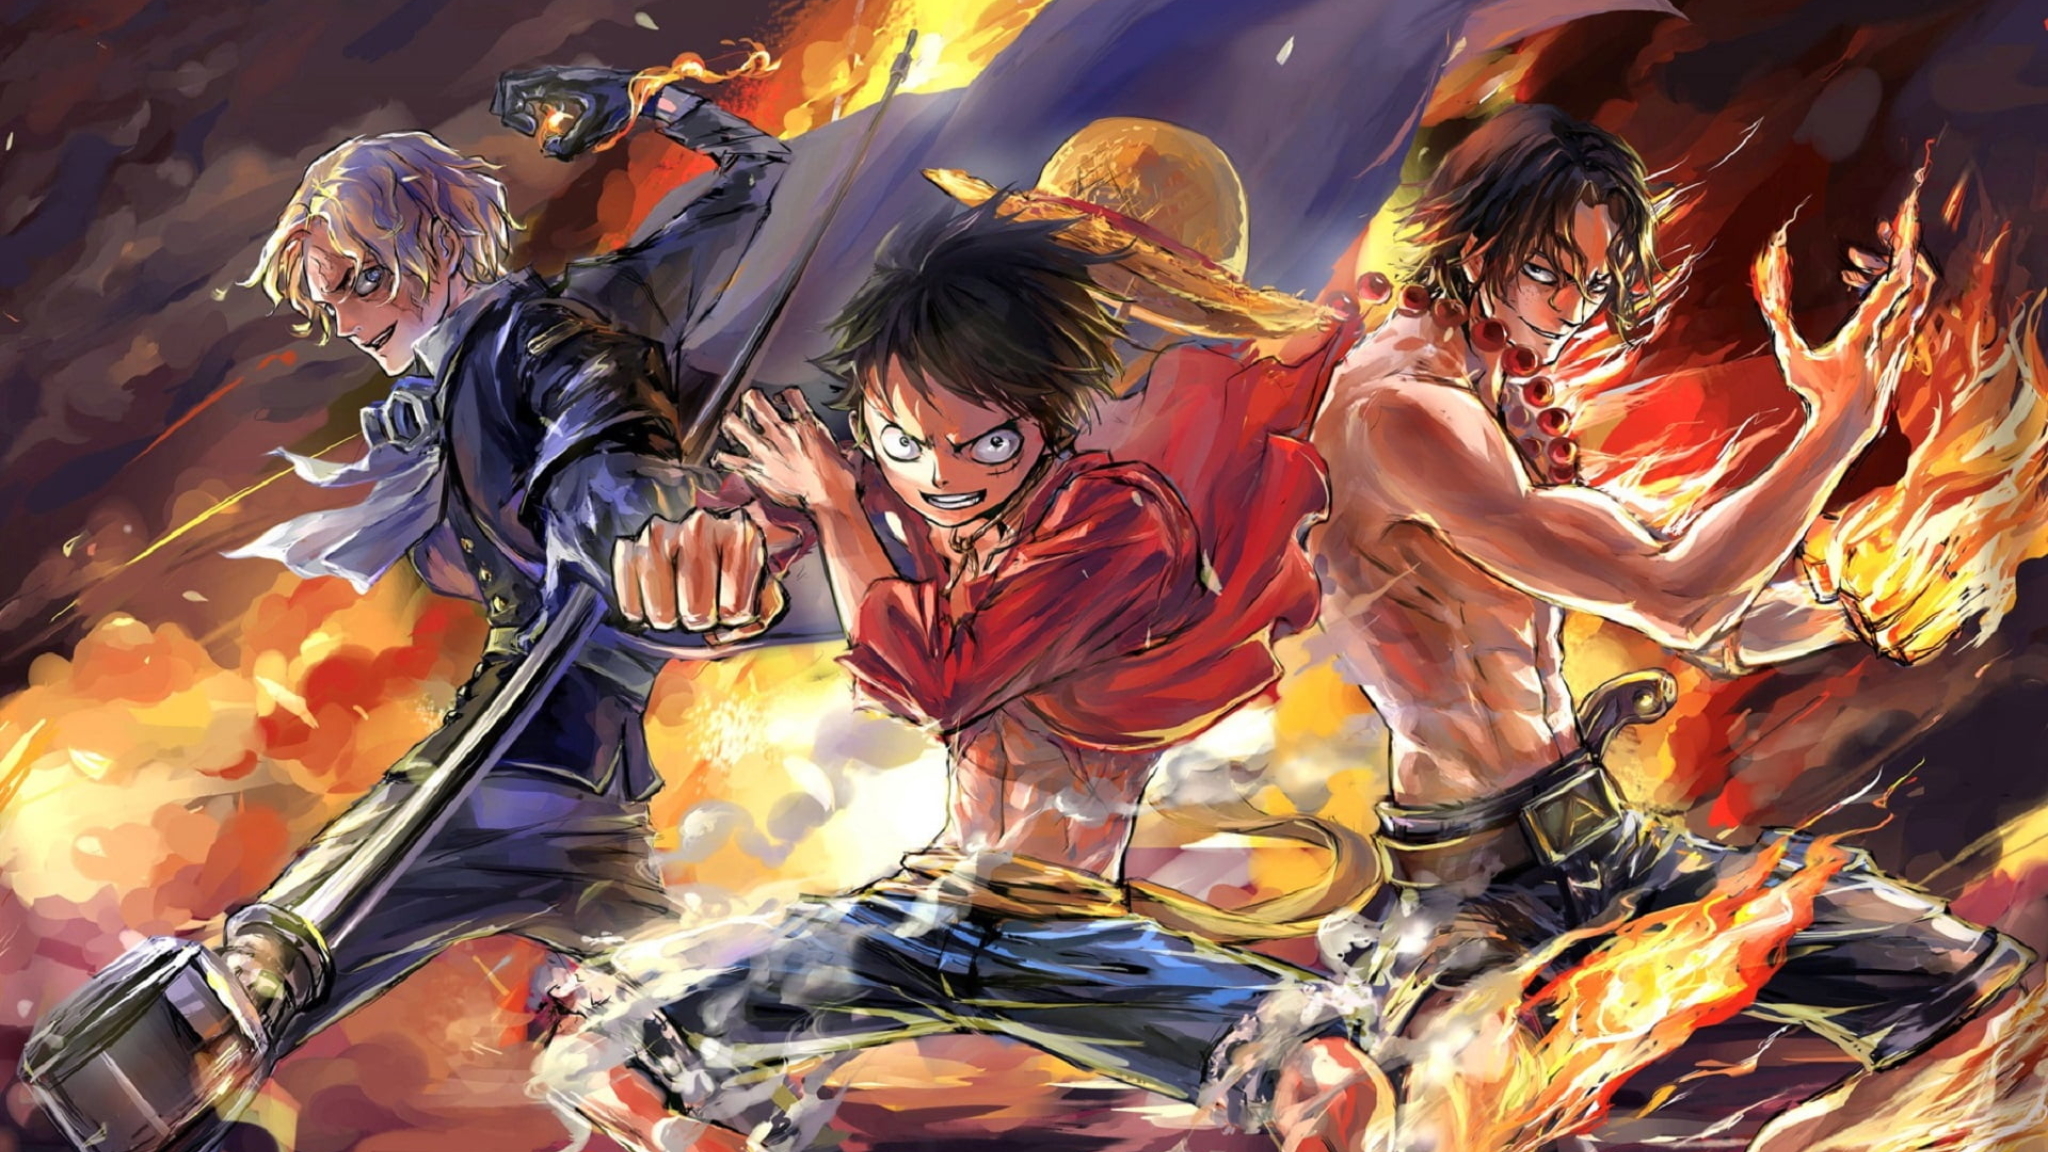 48x1152 Luffy Ace And Sabo One Piece Team 48x1152 Resolution Wallpaper Hd Anime 4k Wallpapers Images Photos And Background Wallpapers Den